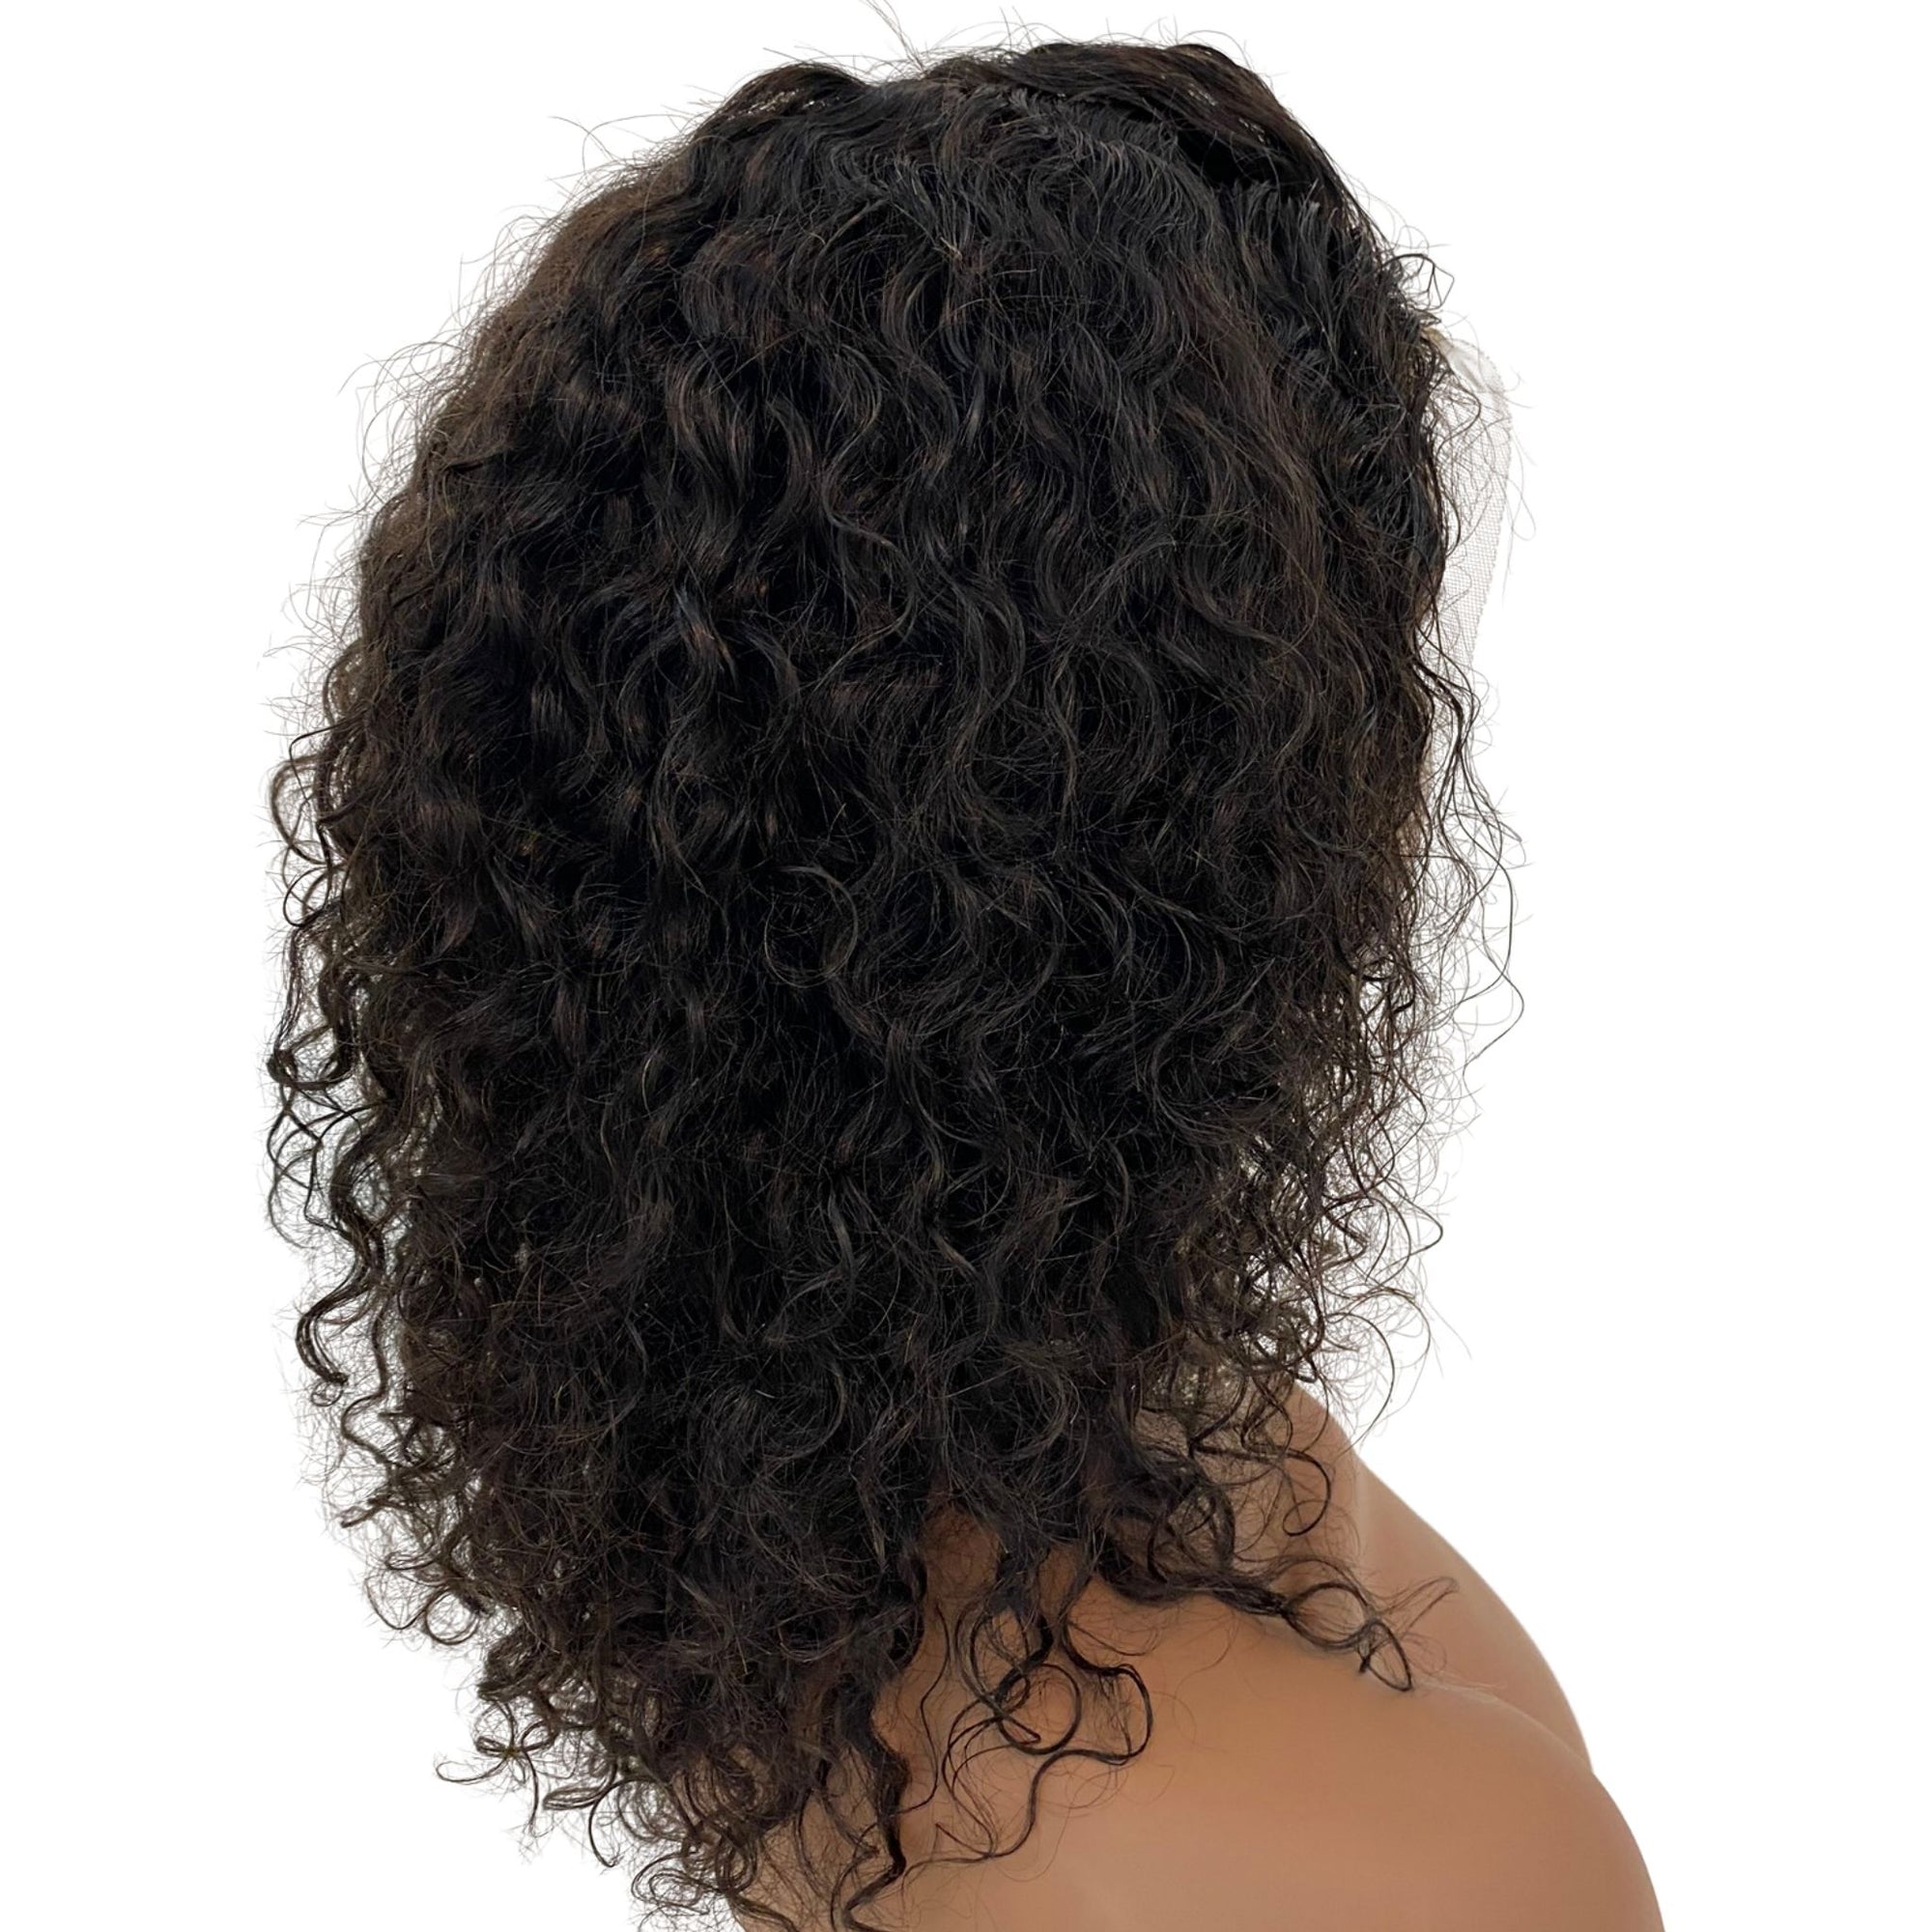 RAW INDIAN FULL LACE WIGS -CURLY